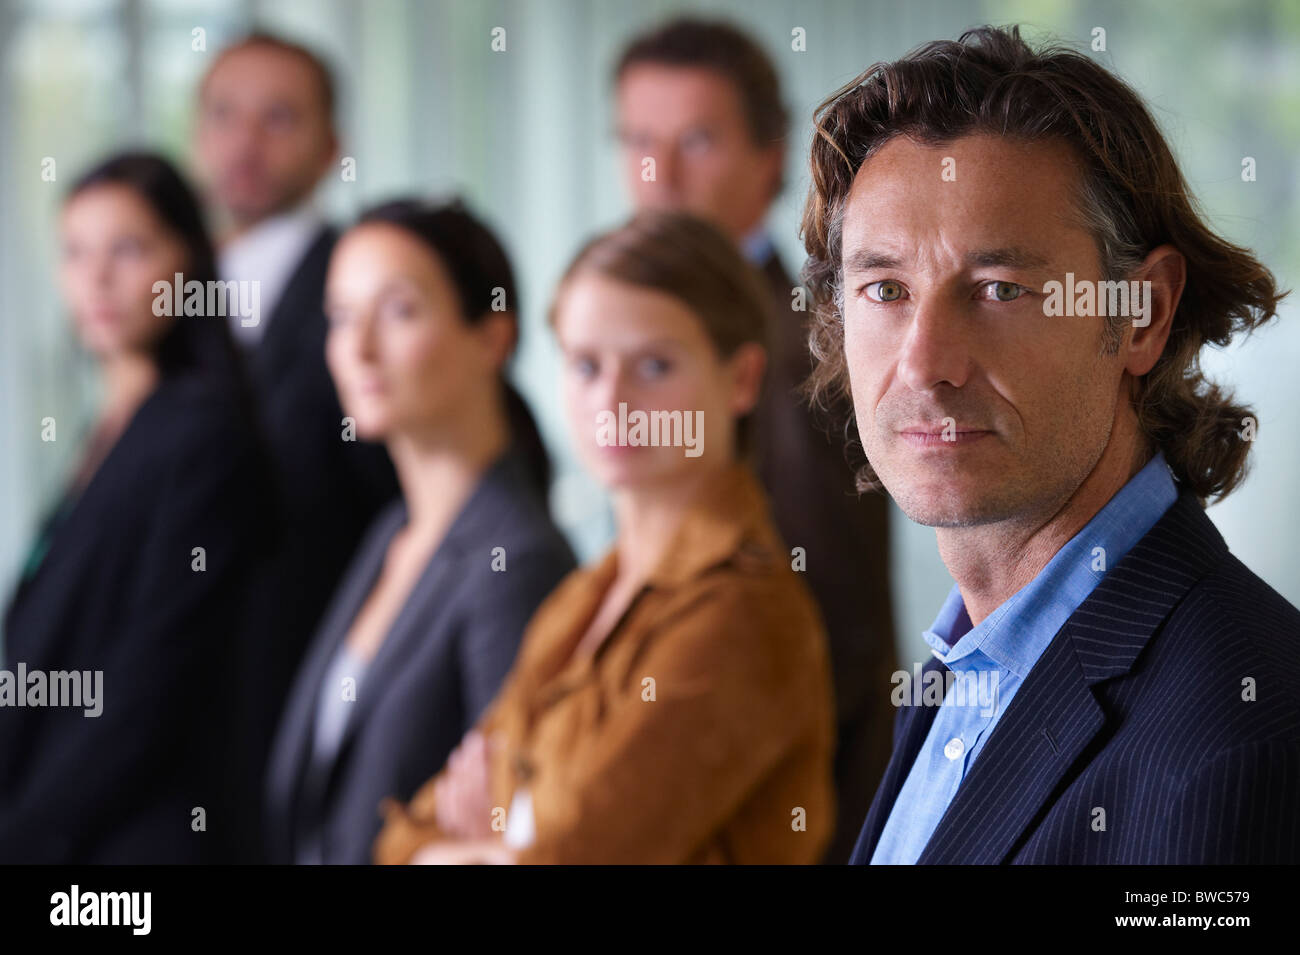 Business team smiling Stock Photo